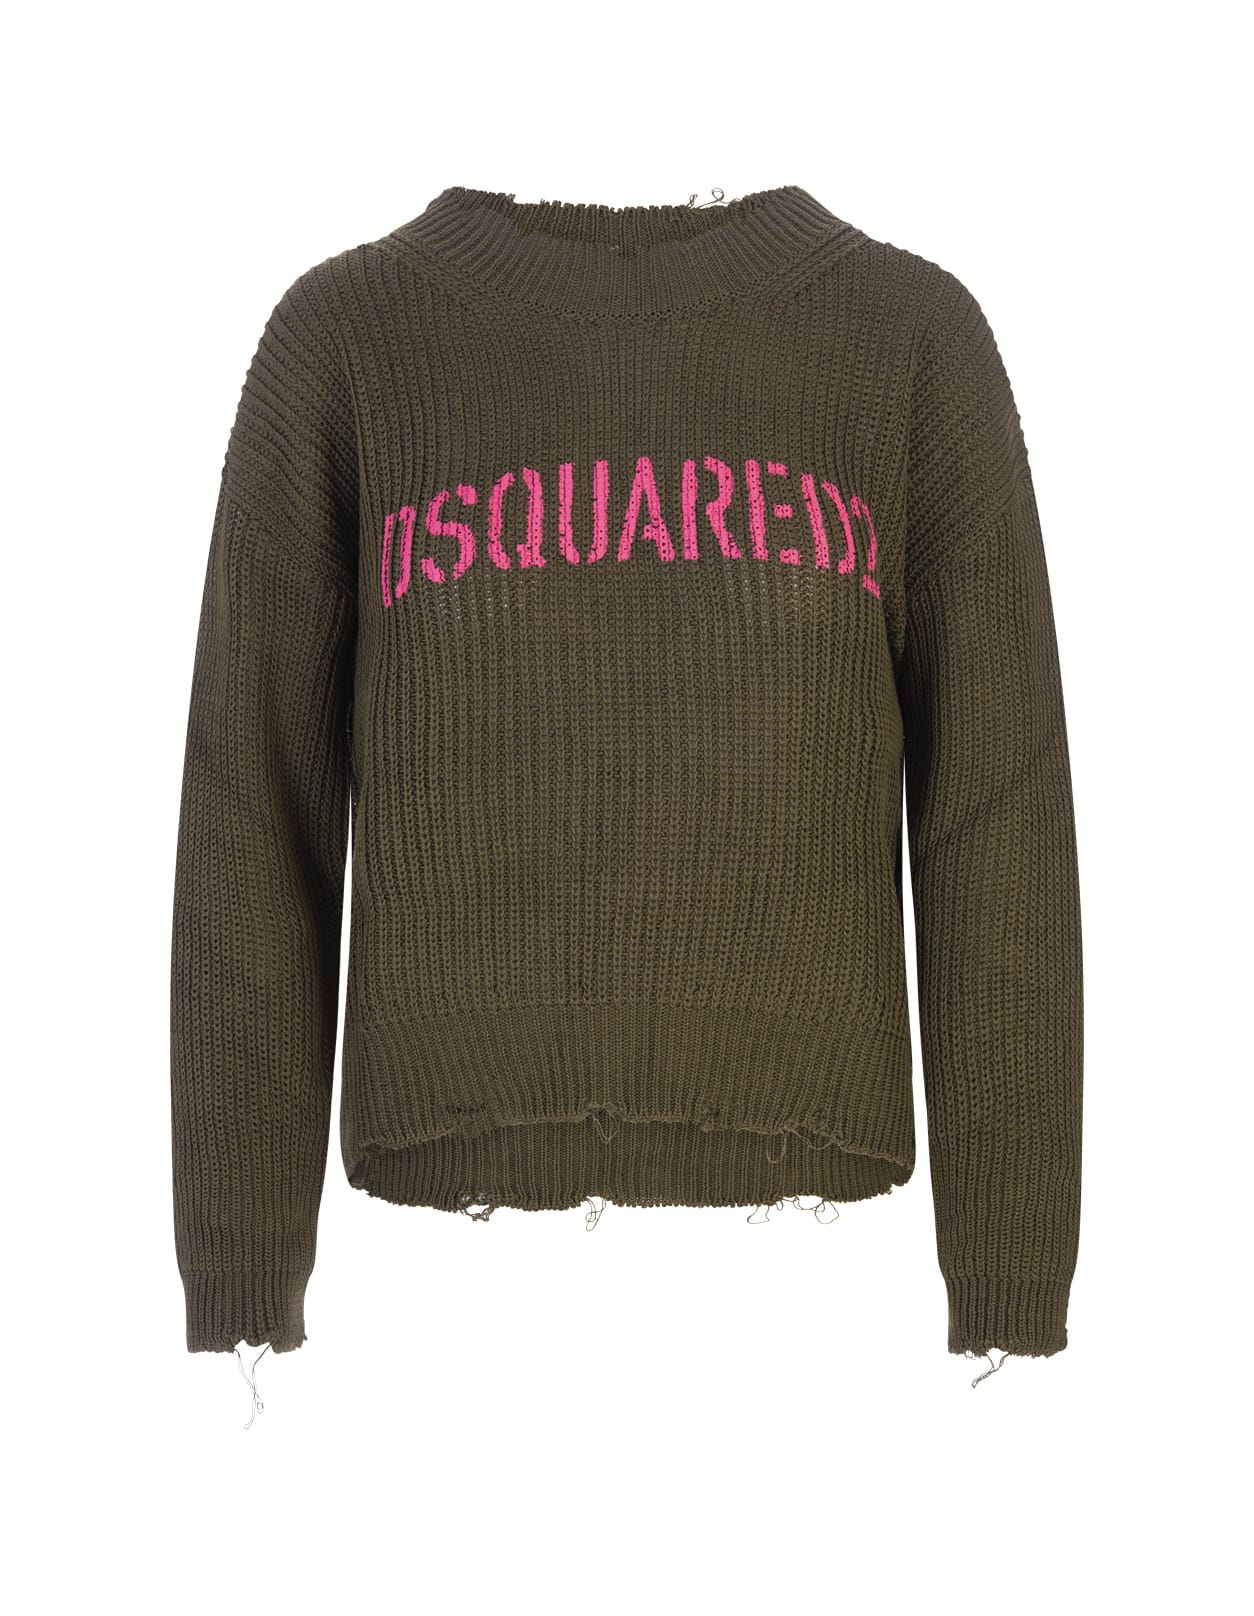 Dsquared2 Woman Military Green Destination Unknown Sweater